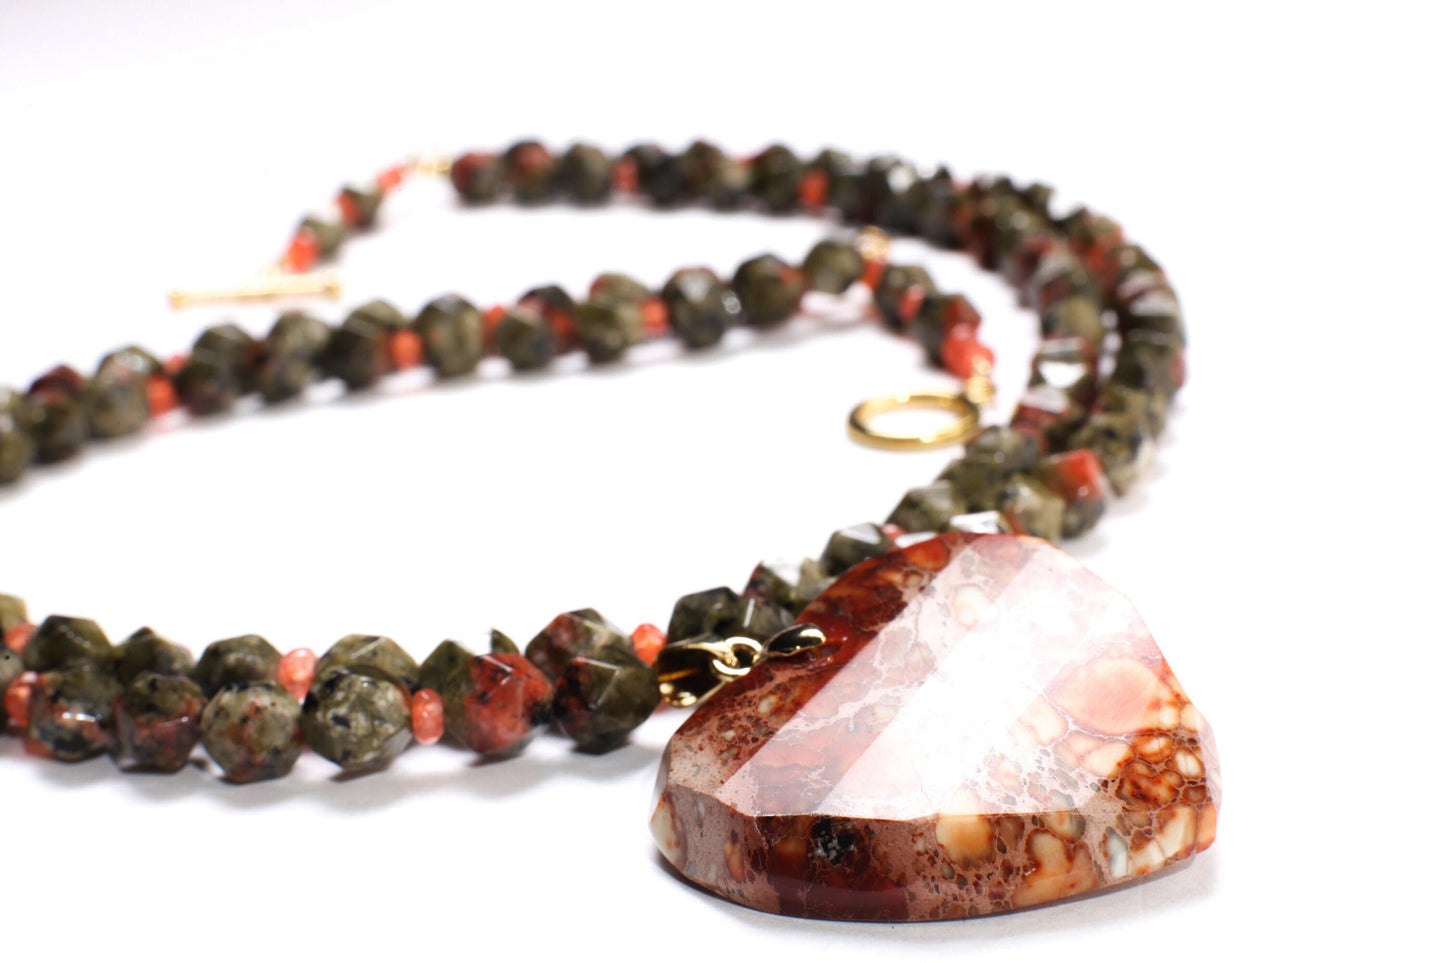 Natural Aqua Terra Jasper Faceted Heart Pendant with Unakite Jasper Octagon Faceted with Carnelian Accent Spacer Beads 2 Line 21&quot; Necklace